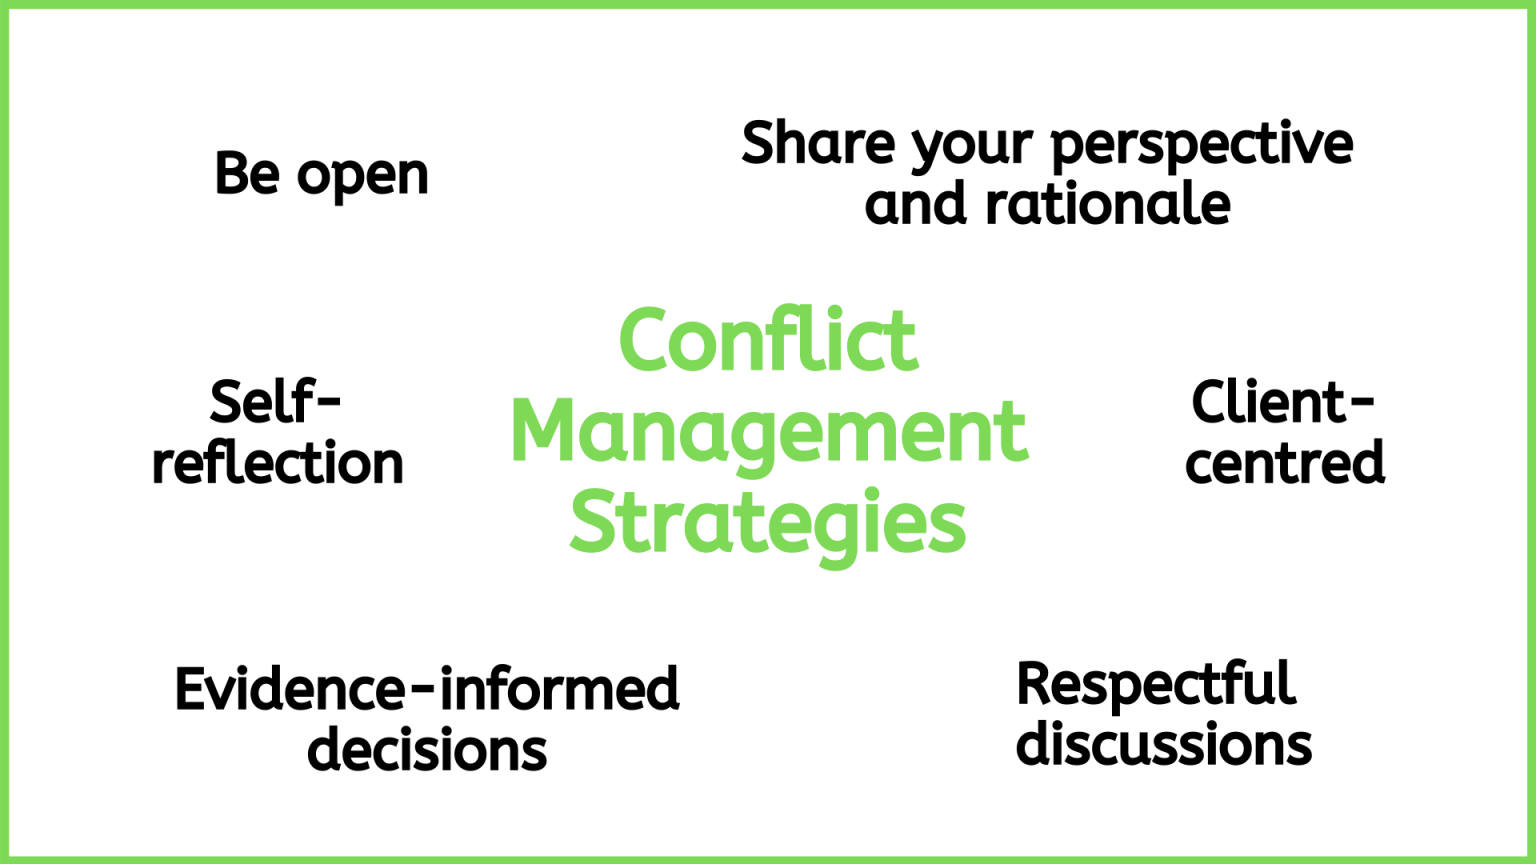 Conflict Management Strategies are listed. They include; be open, share tour perspective and rationale, self-reflection, client-centered, evidence-informed decisions, respectful discussions.